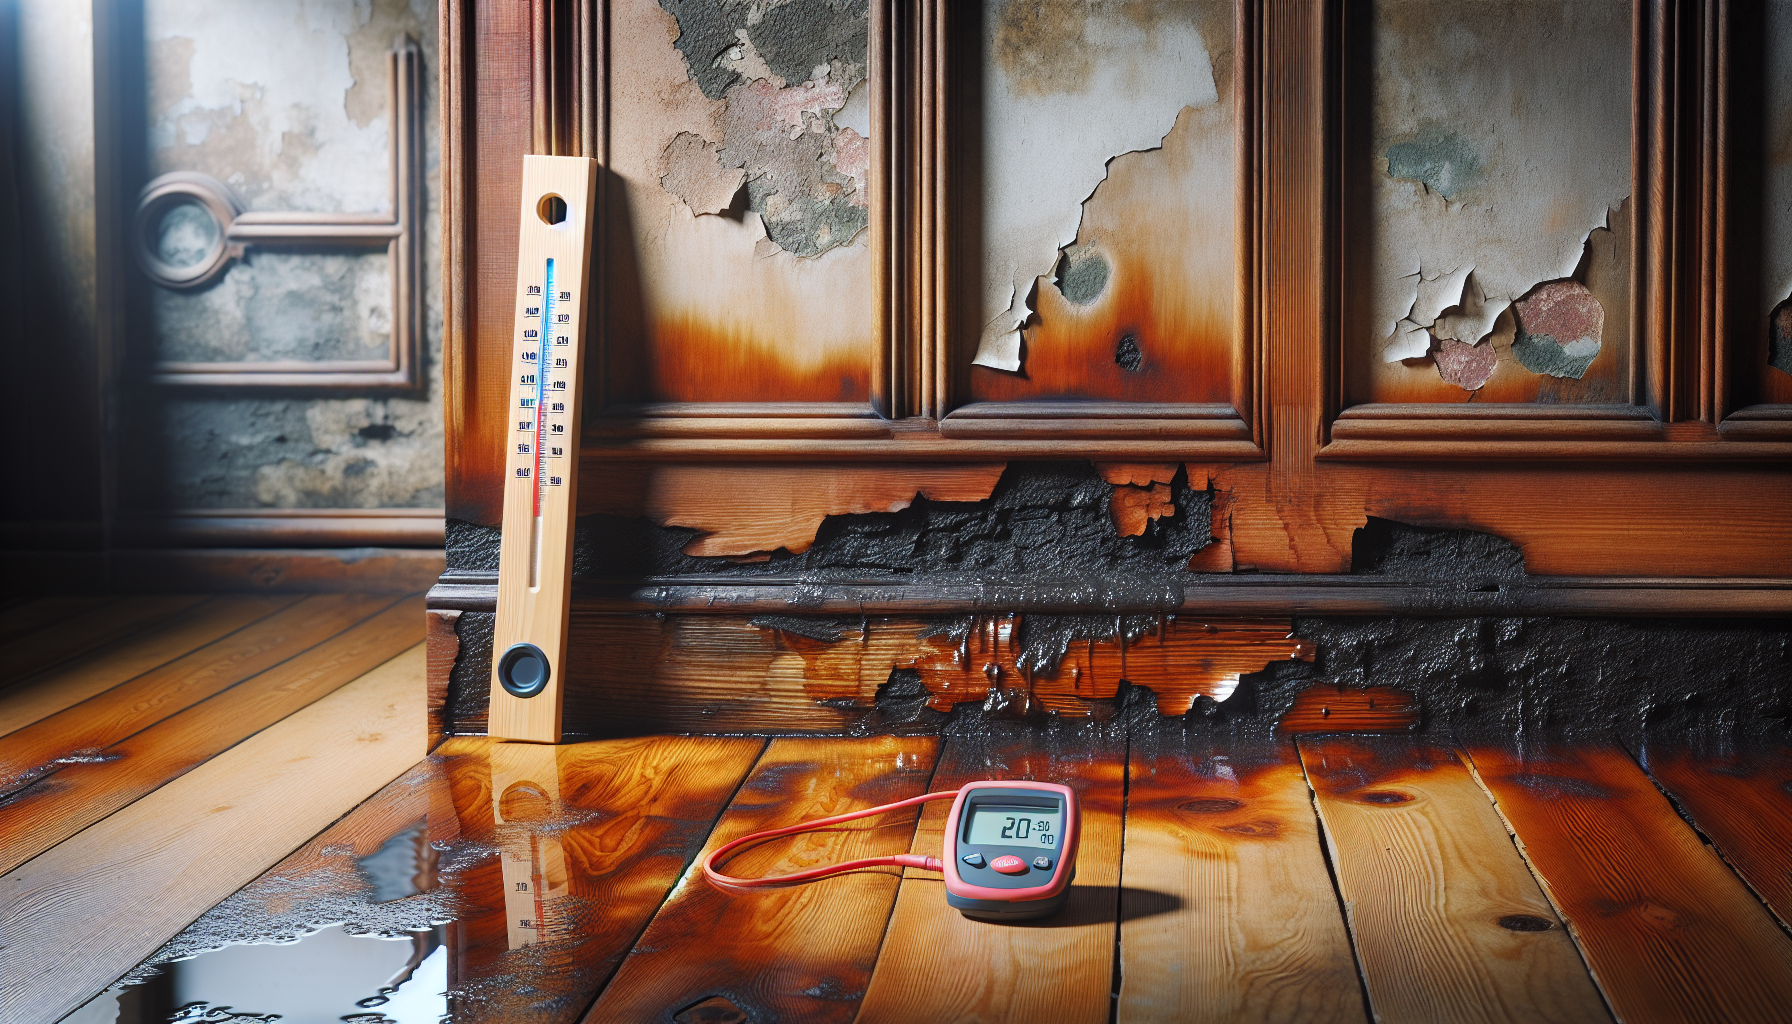 Assessing the extent of water damage on wood floors